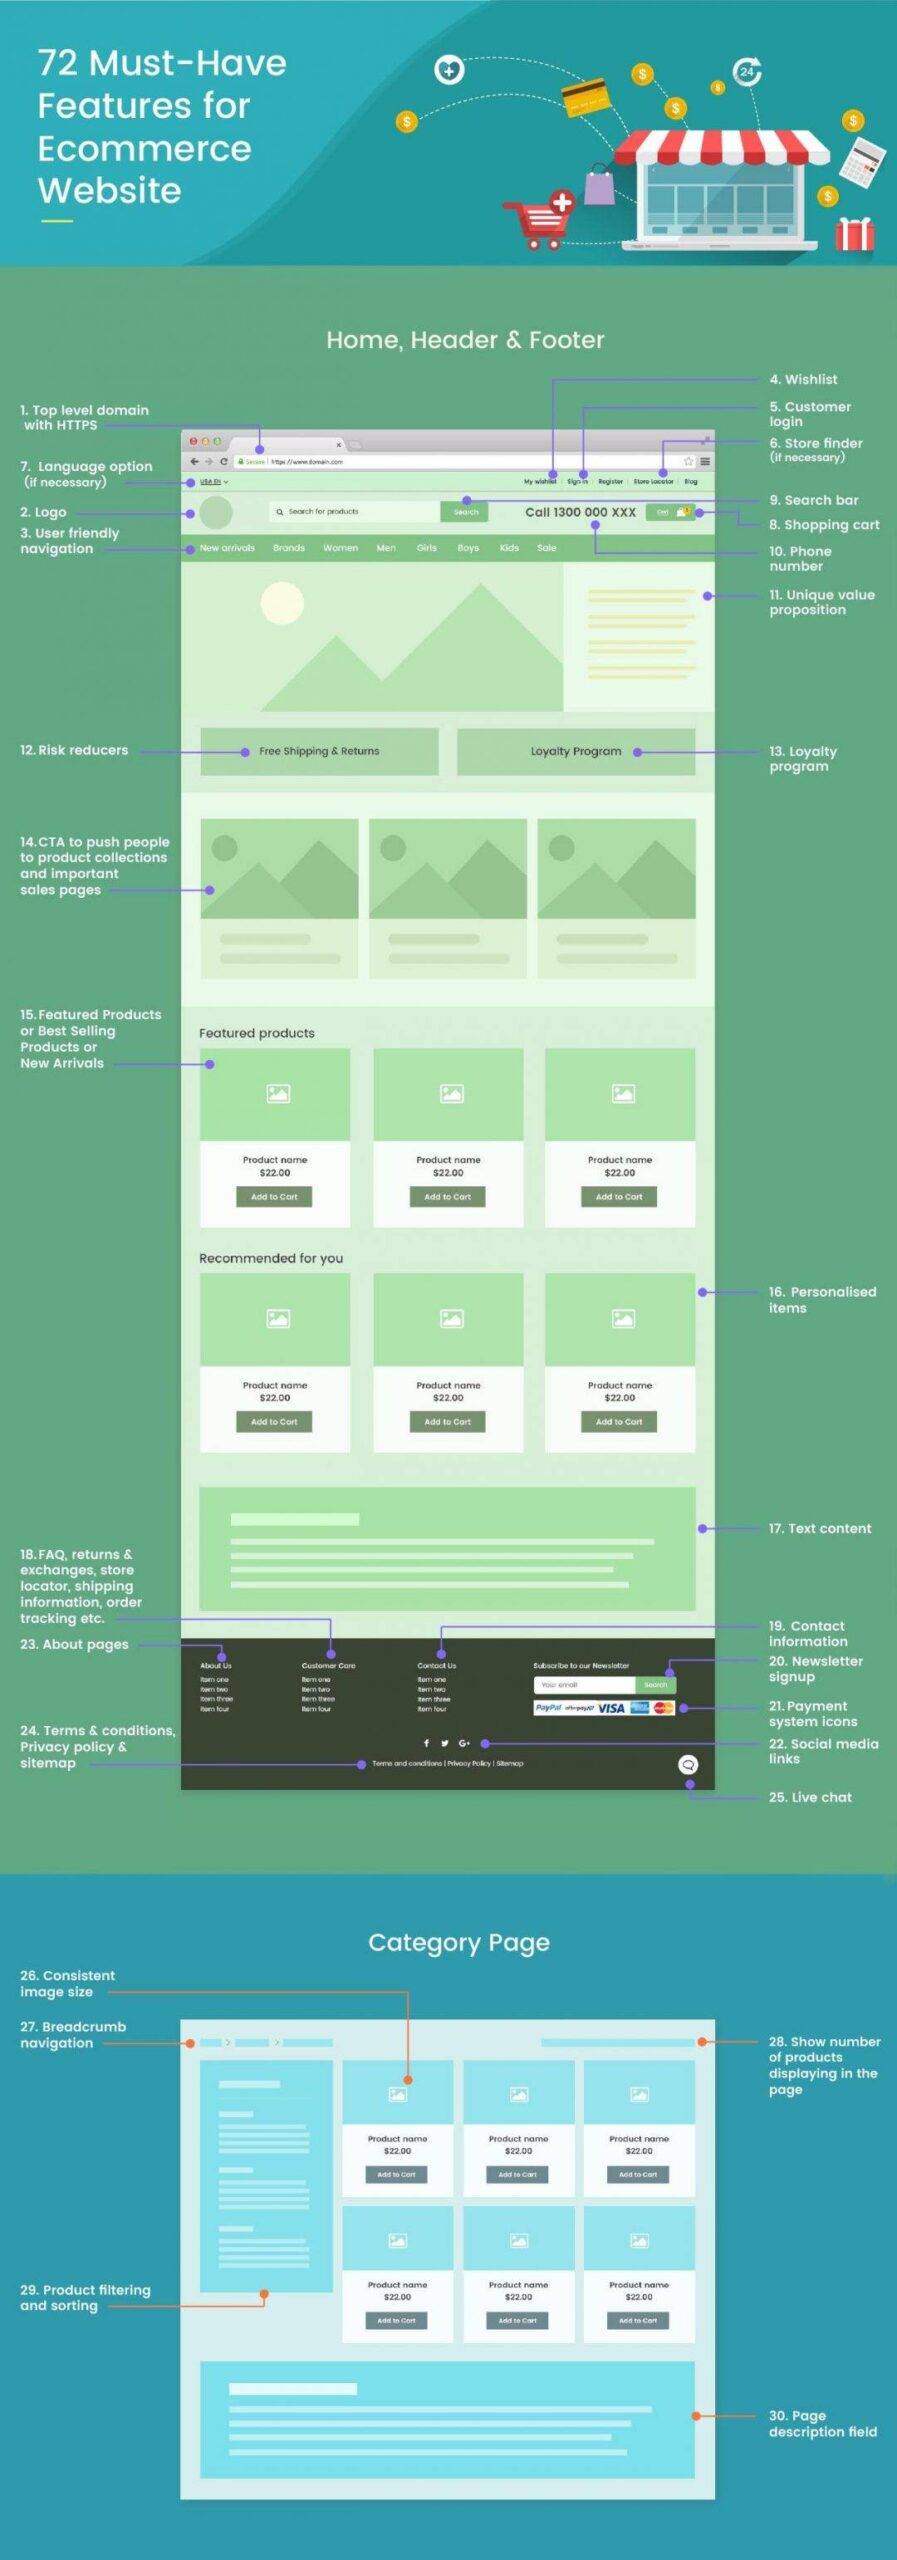 ecommerce website features infographic 1 1080x3082 1 scaled - Midas Creative